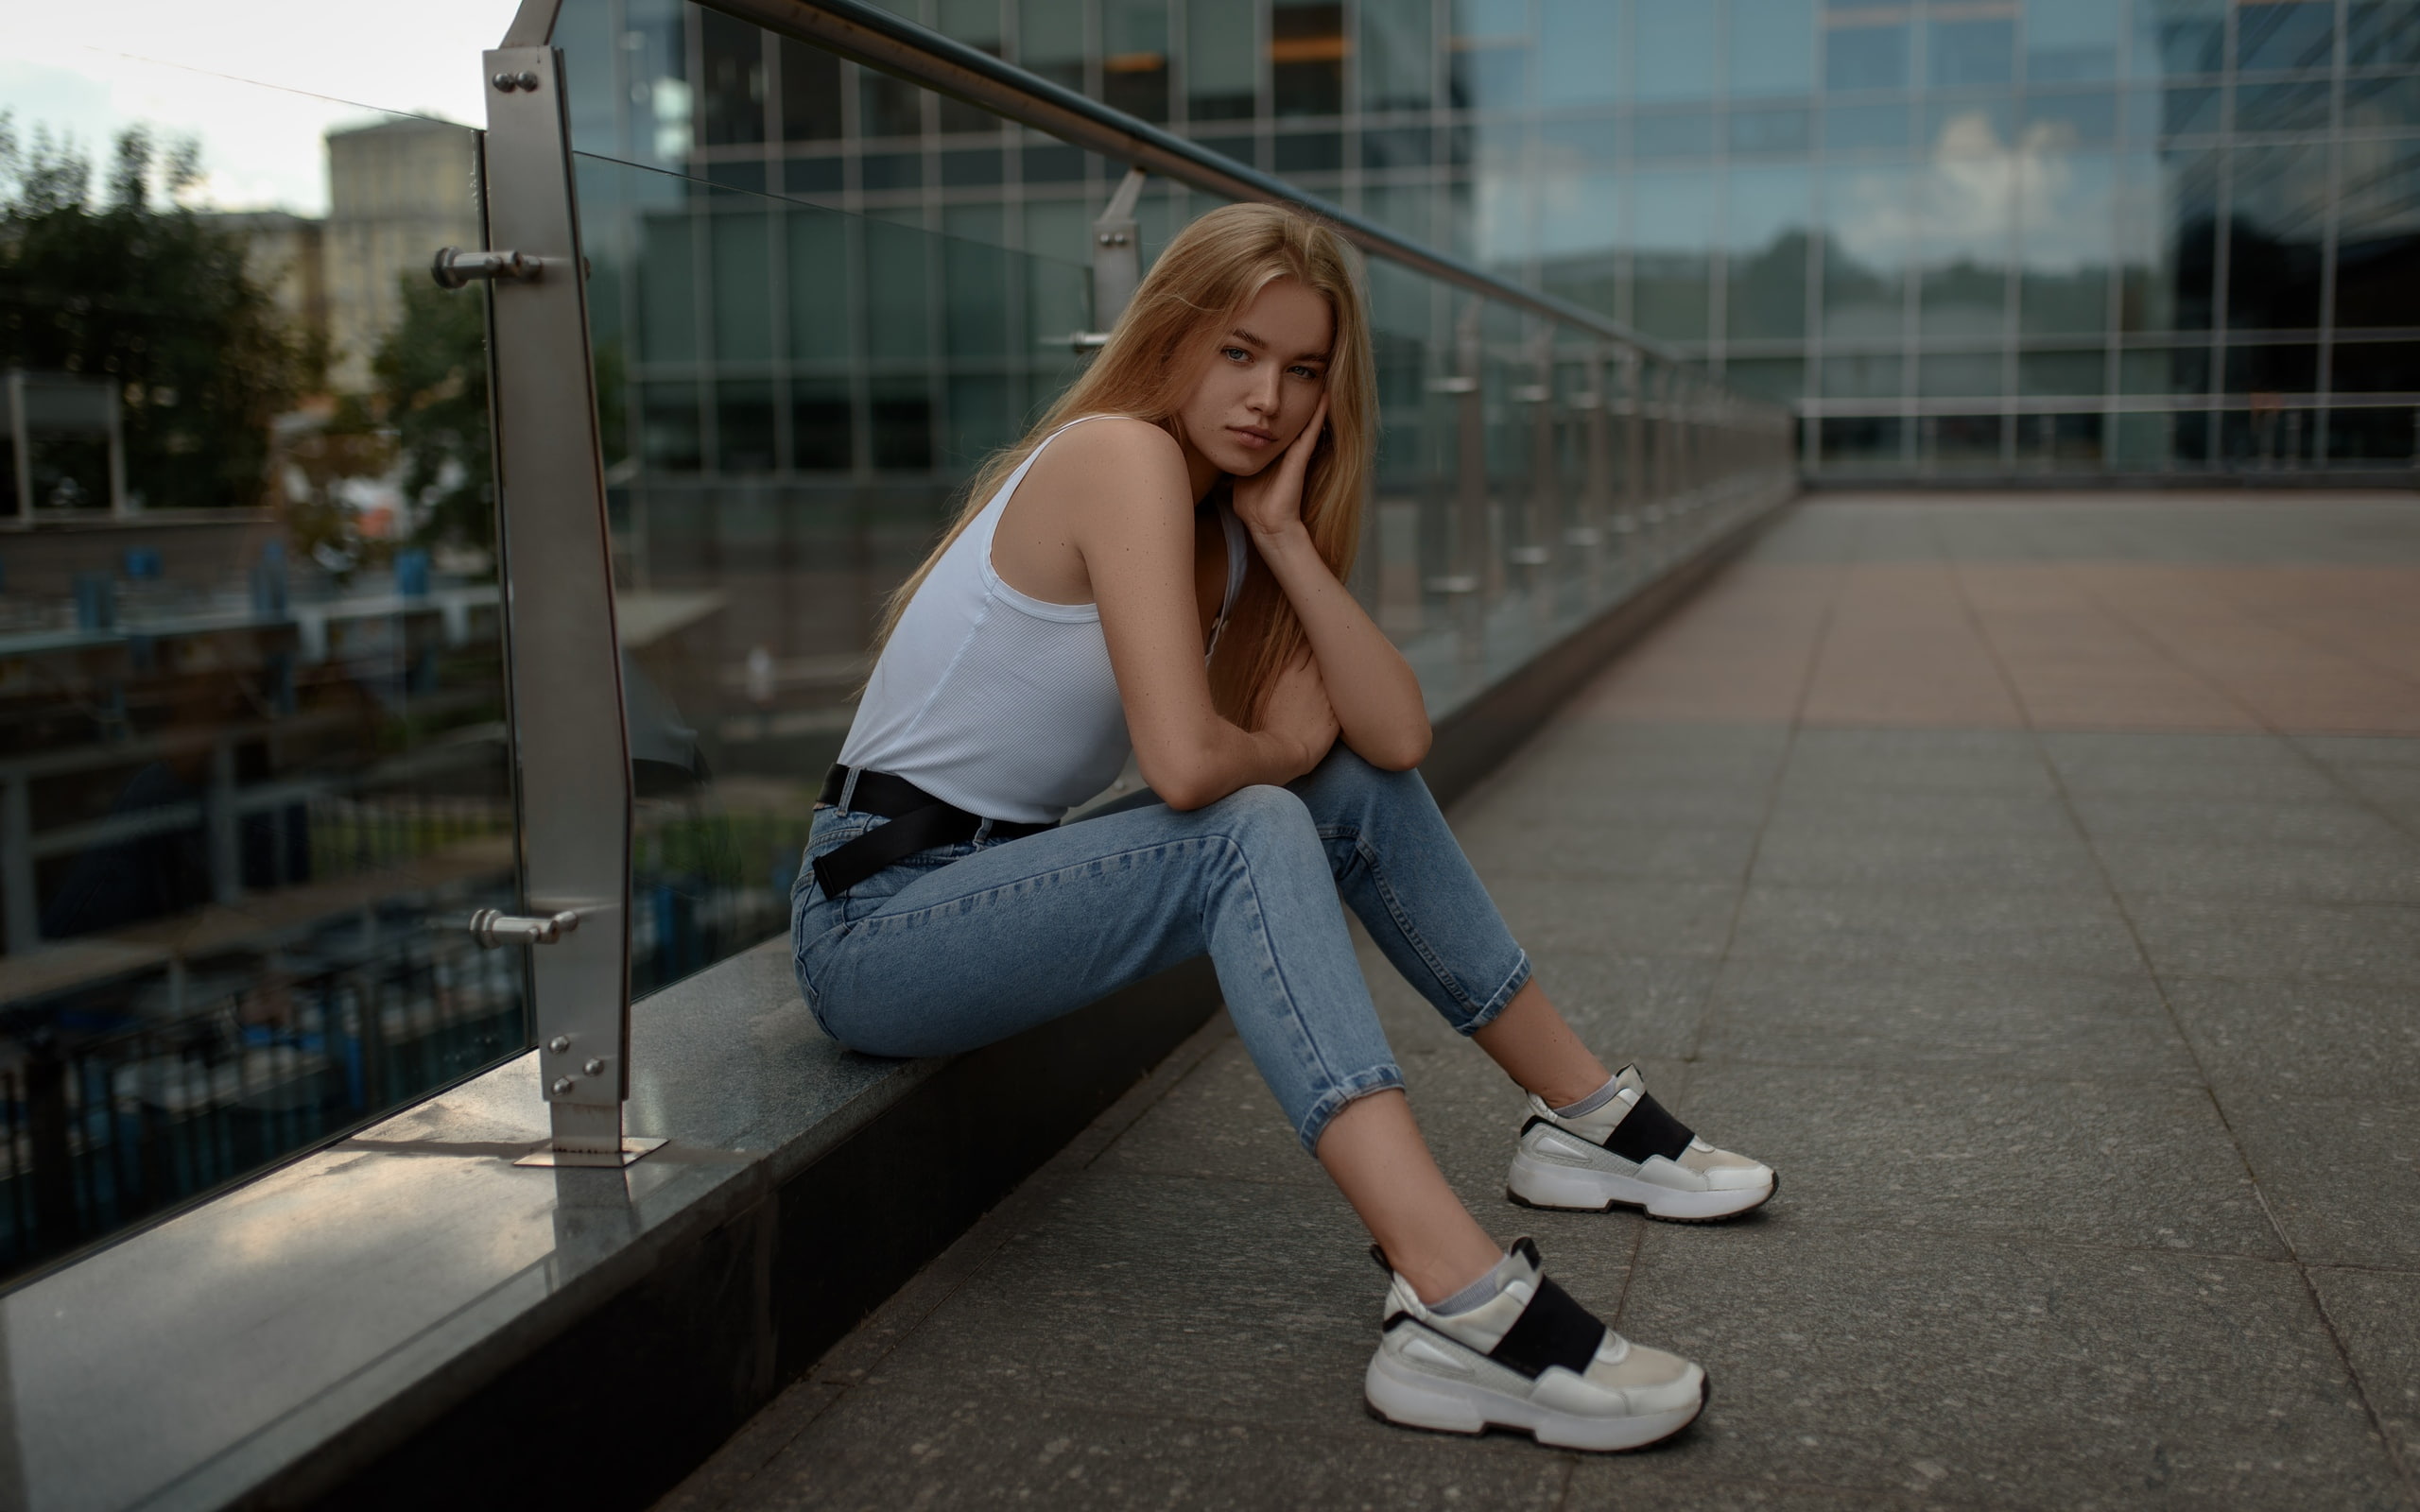 People 2560x1600 women model blonde long hair looking at viewer touching face tank top white tops jeans glass sitting sneakers side view depth of field building portrait outdoors women outdoors